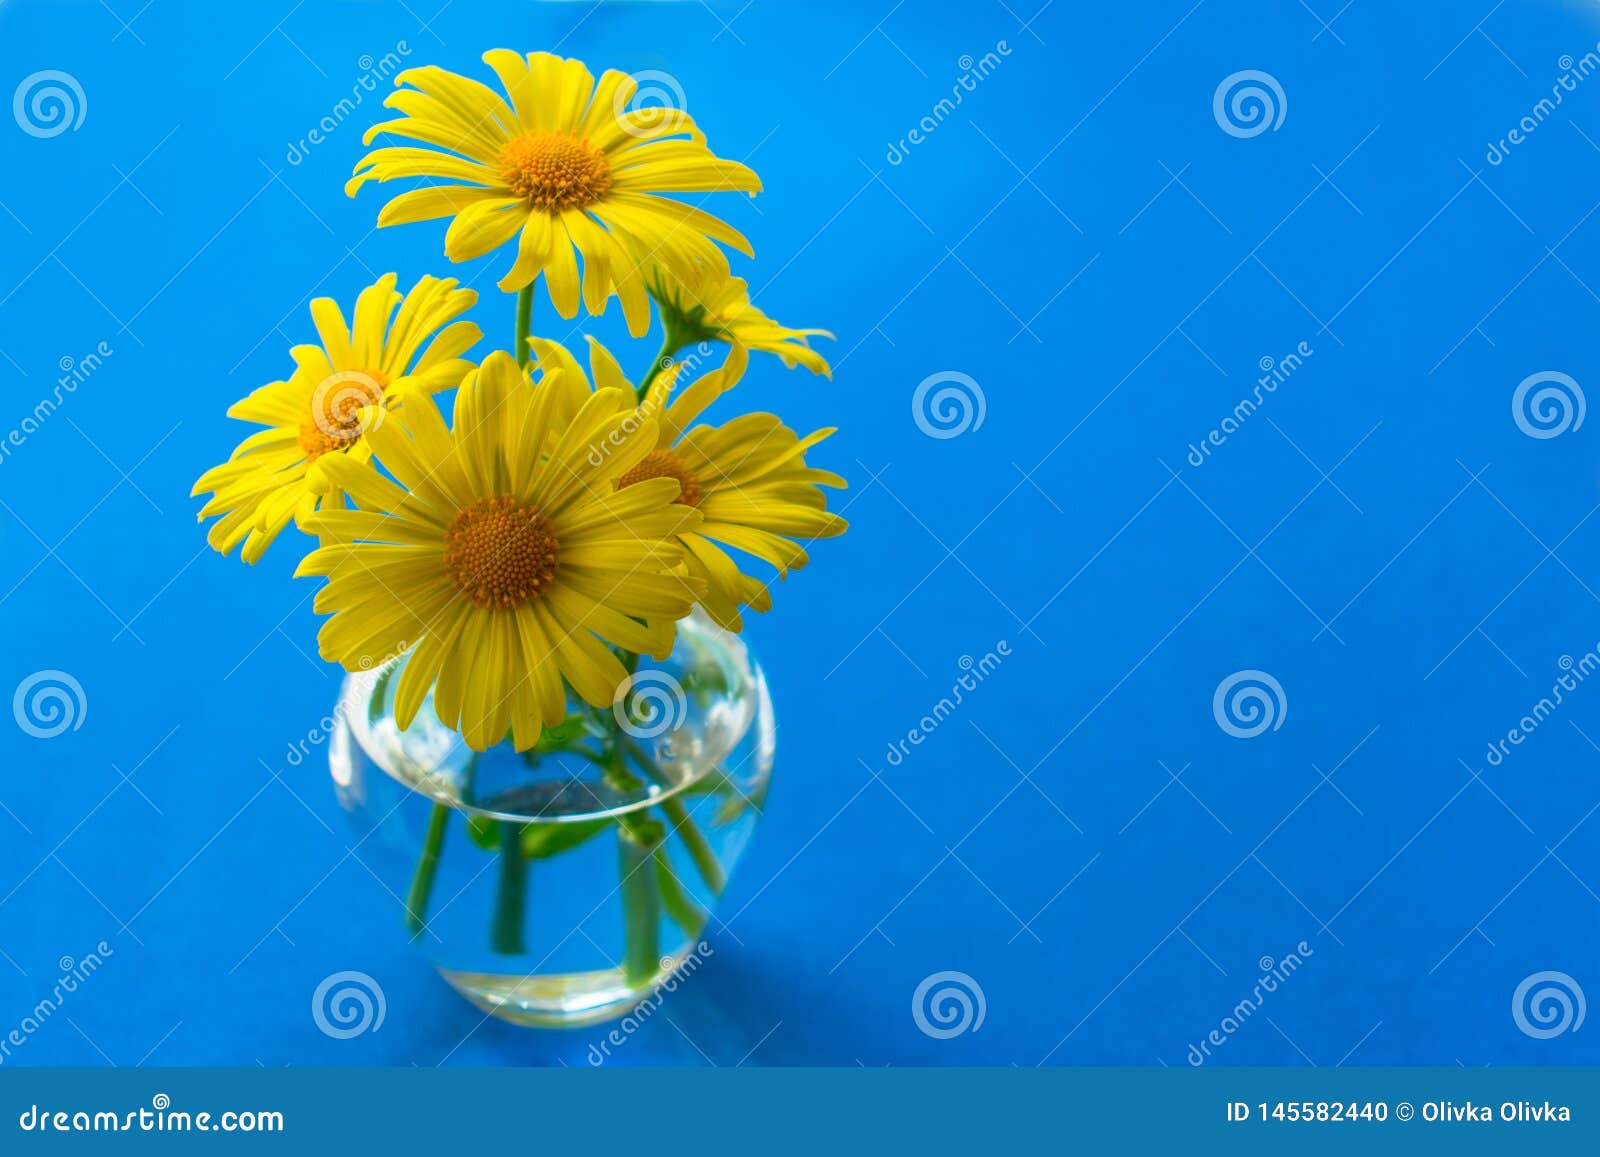 Yellow Daisies in a Small Vase on a Blue Background Stock Photo - Image ...